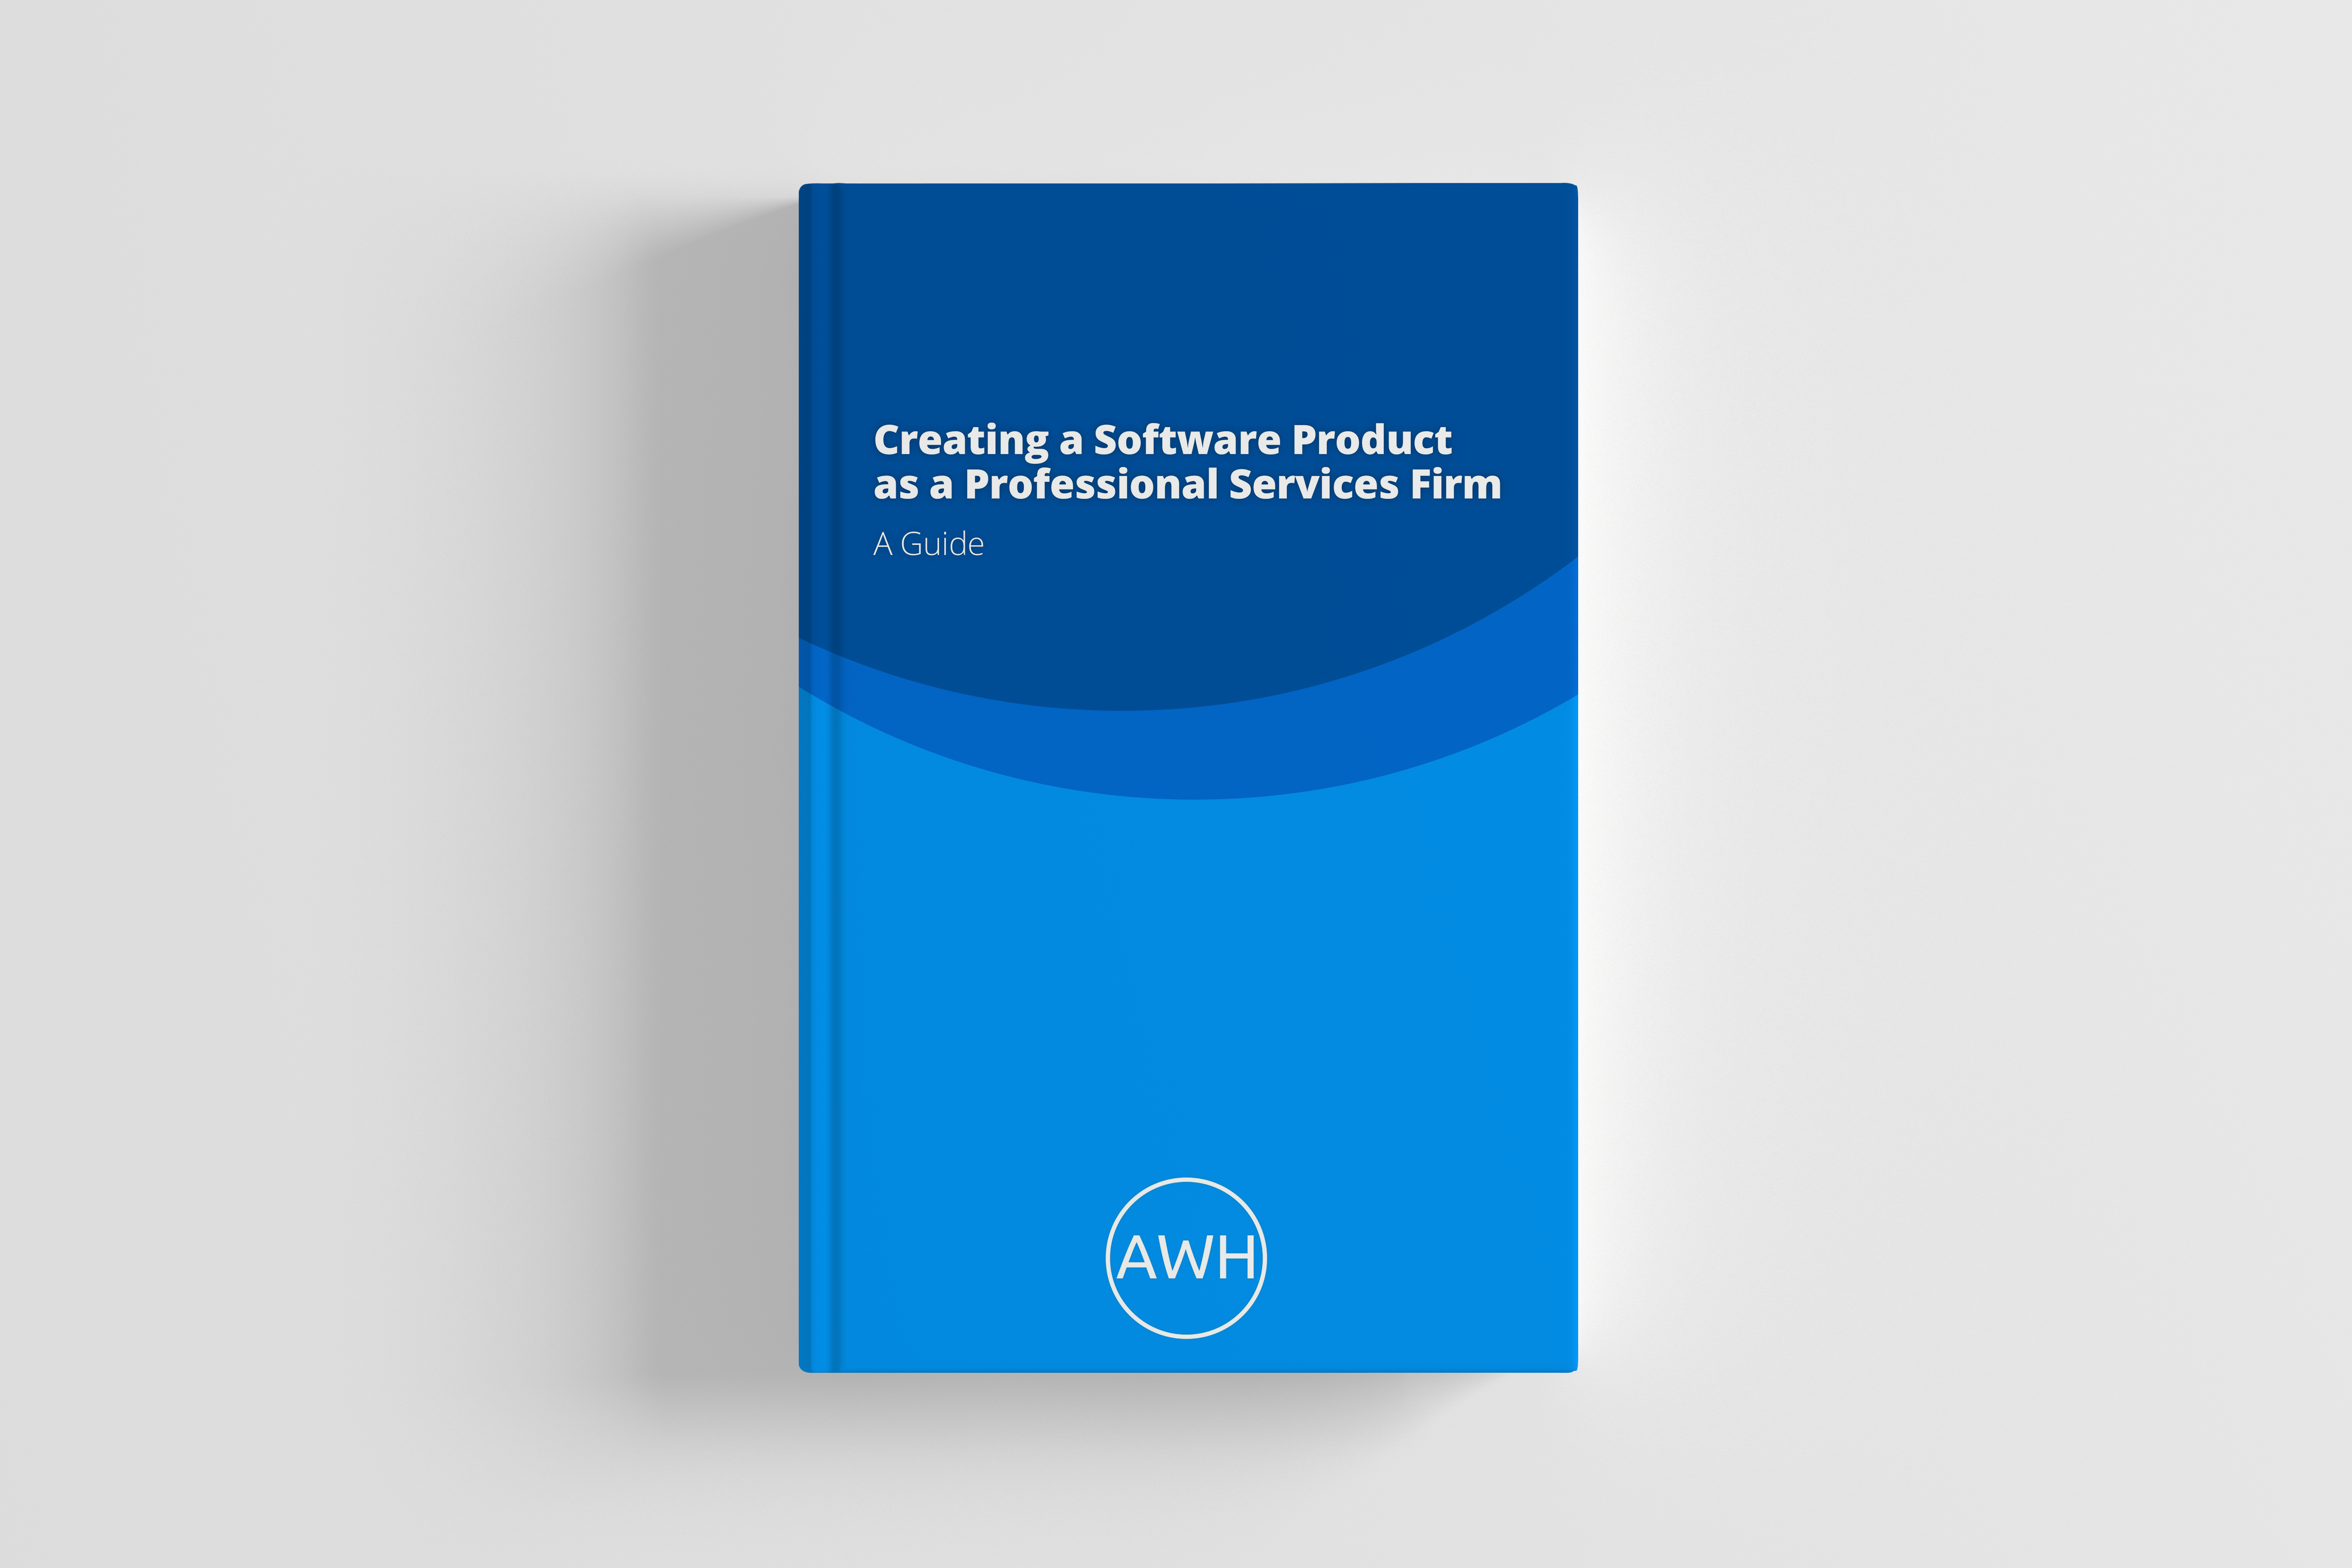 Ebook cover  for creating a software project as a professional services firm